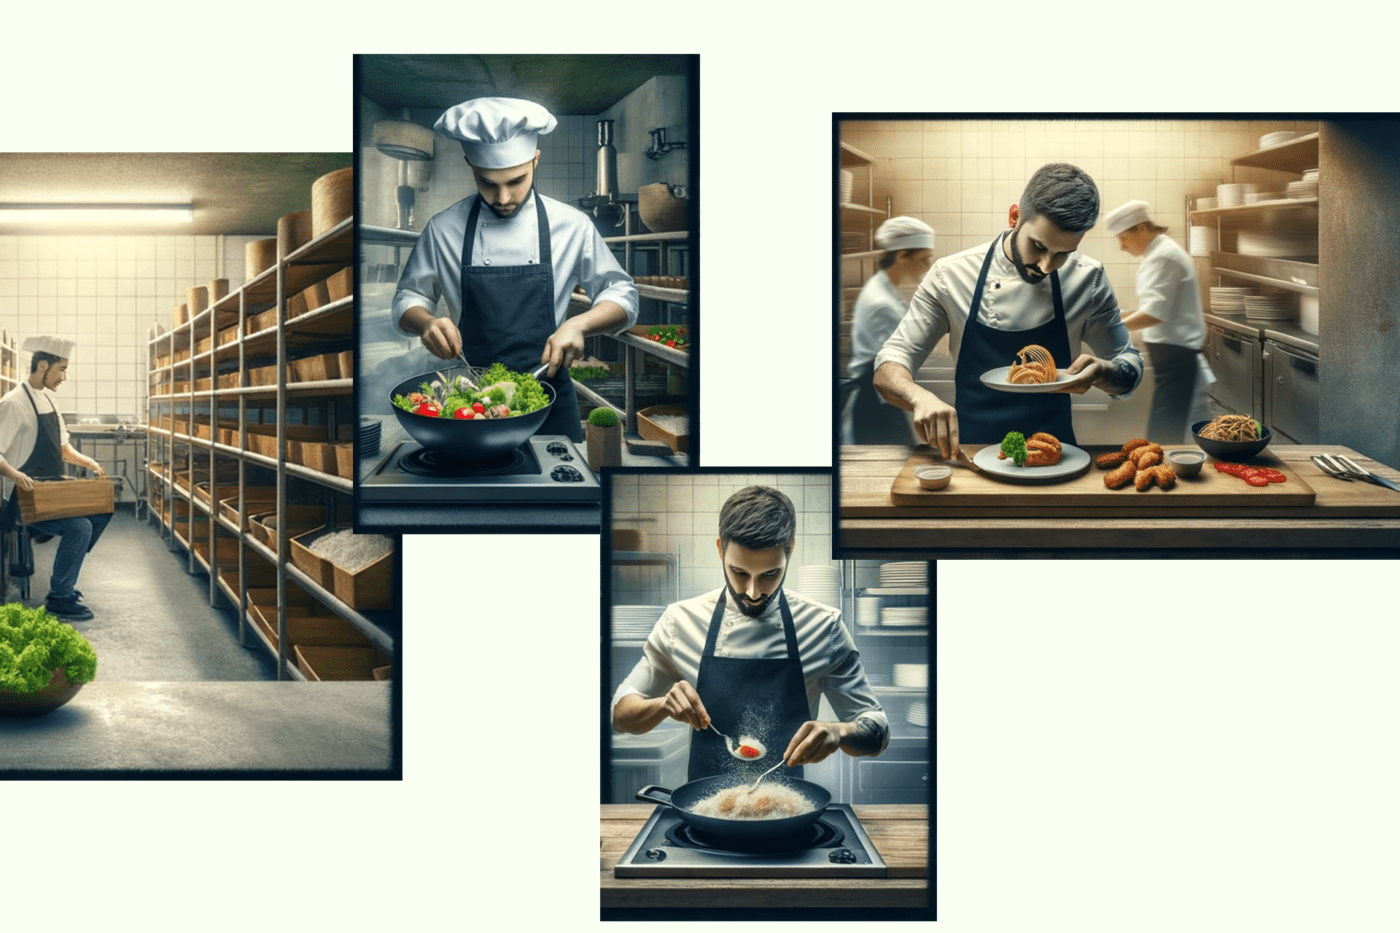 Four-image sequence showing a man's culinary career progression from pantry worker to chef